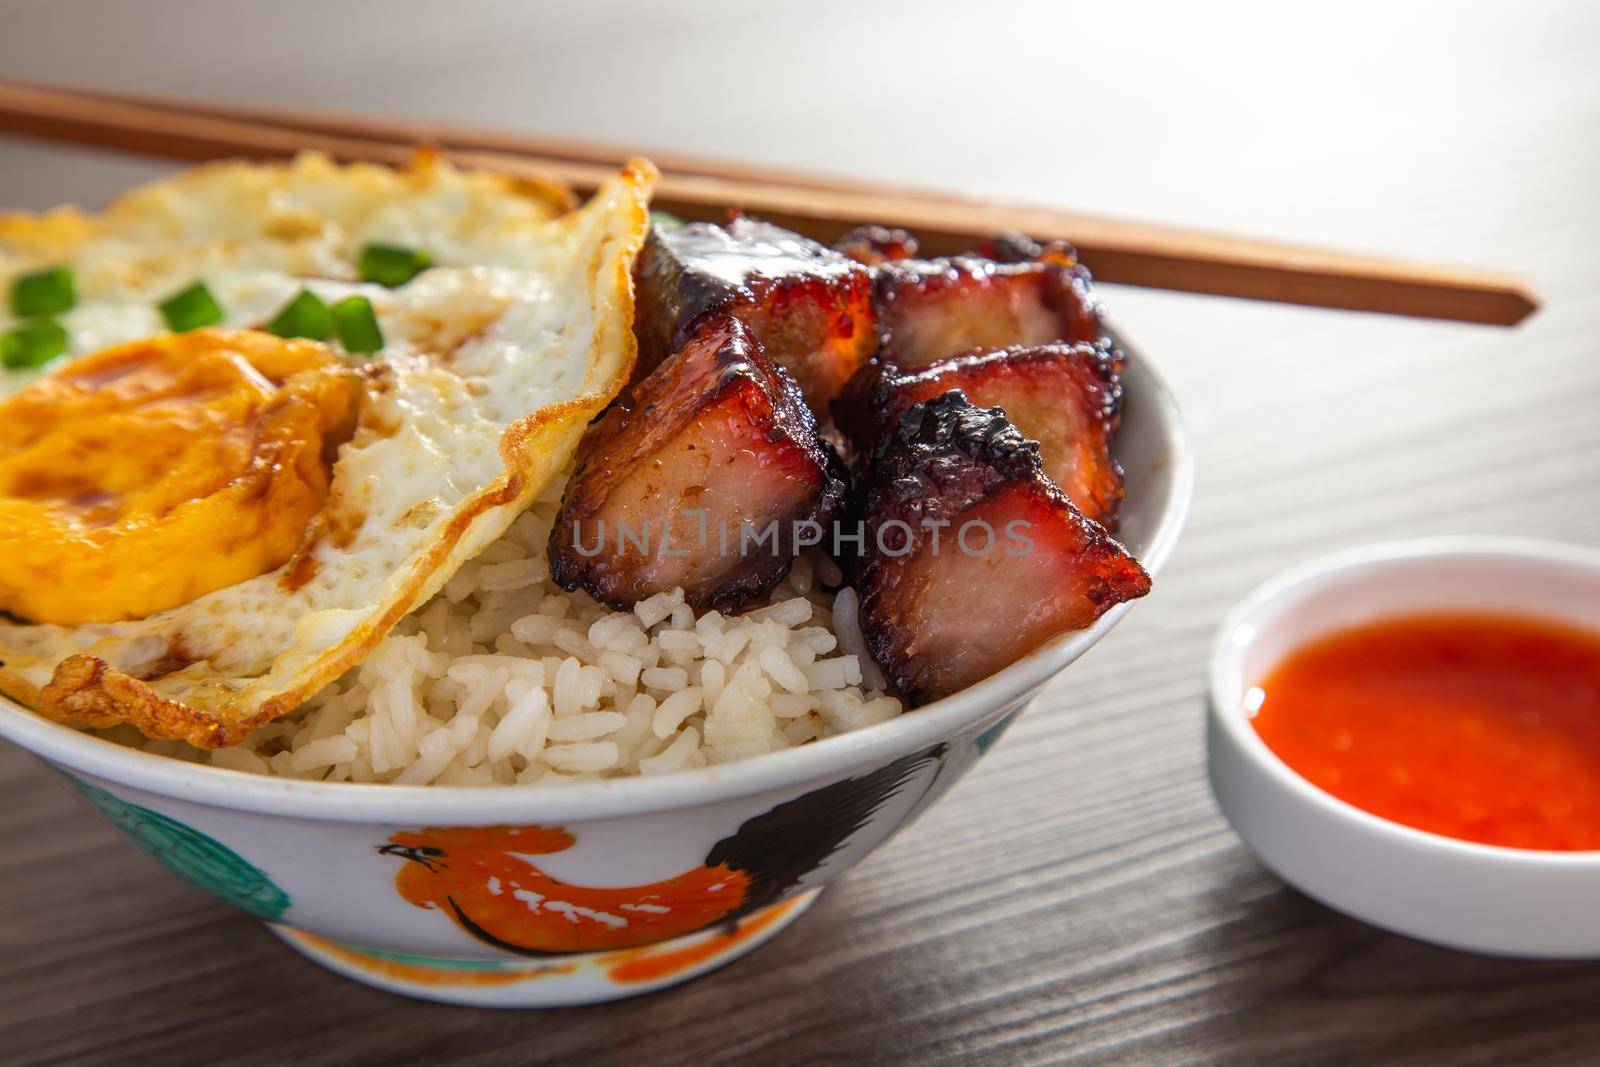 Chinese Sweet Bbq Pork is marinated in a sweet BBQ sauce and served with white rice. by tehcheesiong